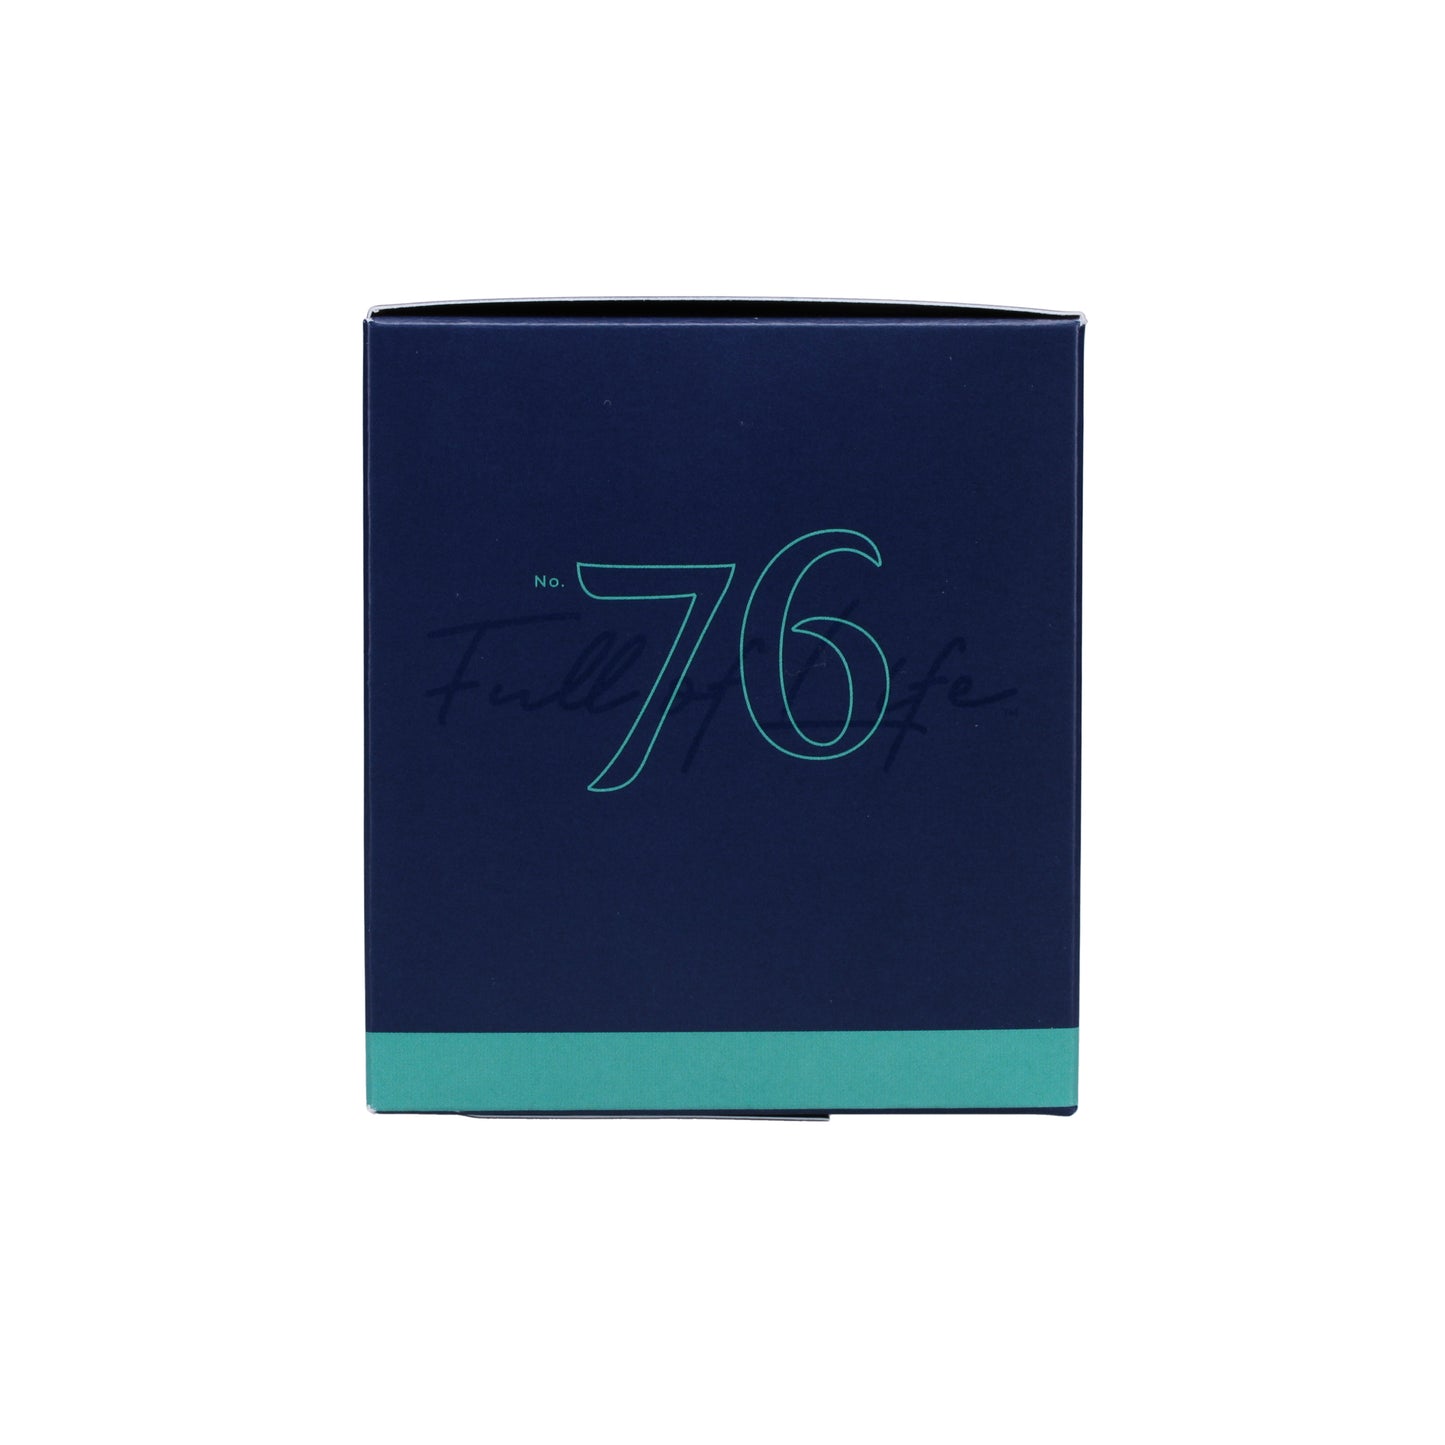 No. 76 Watermint Eucalyptus 7 oz. Candle in Signature Box Image 6